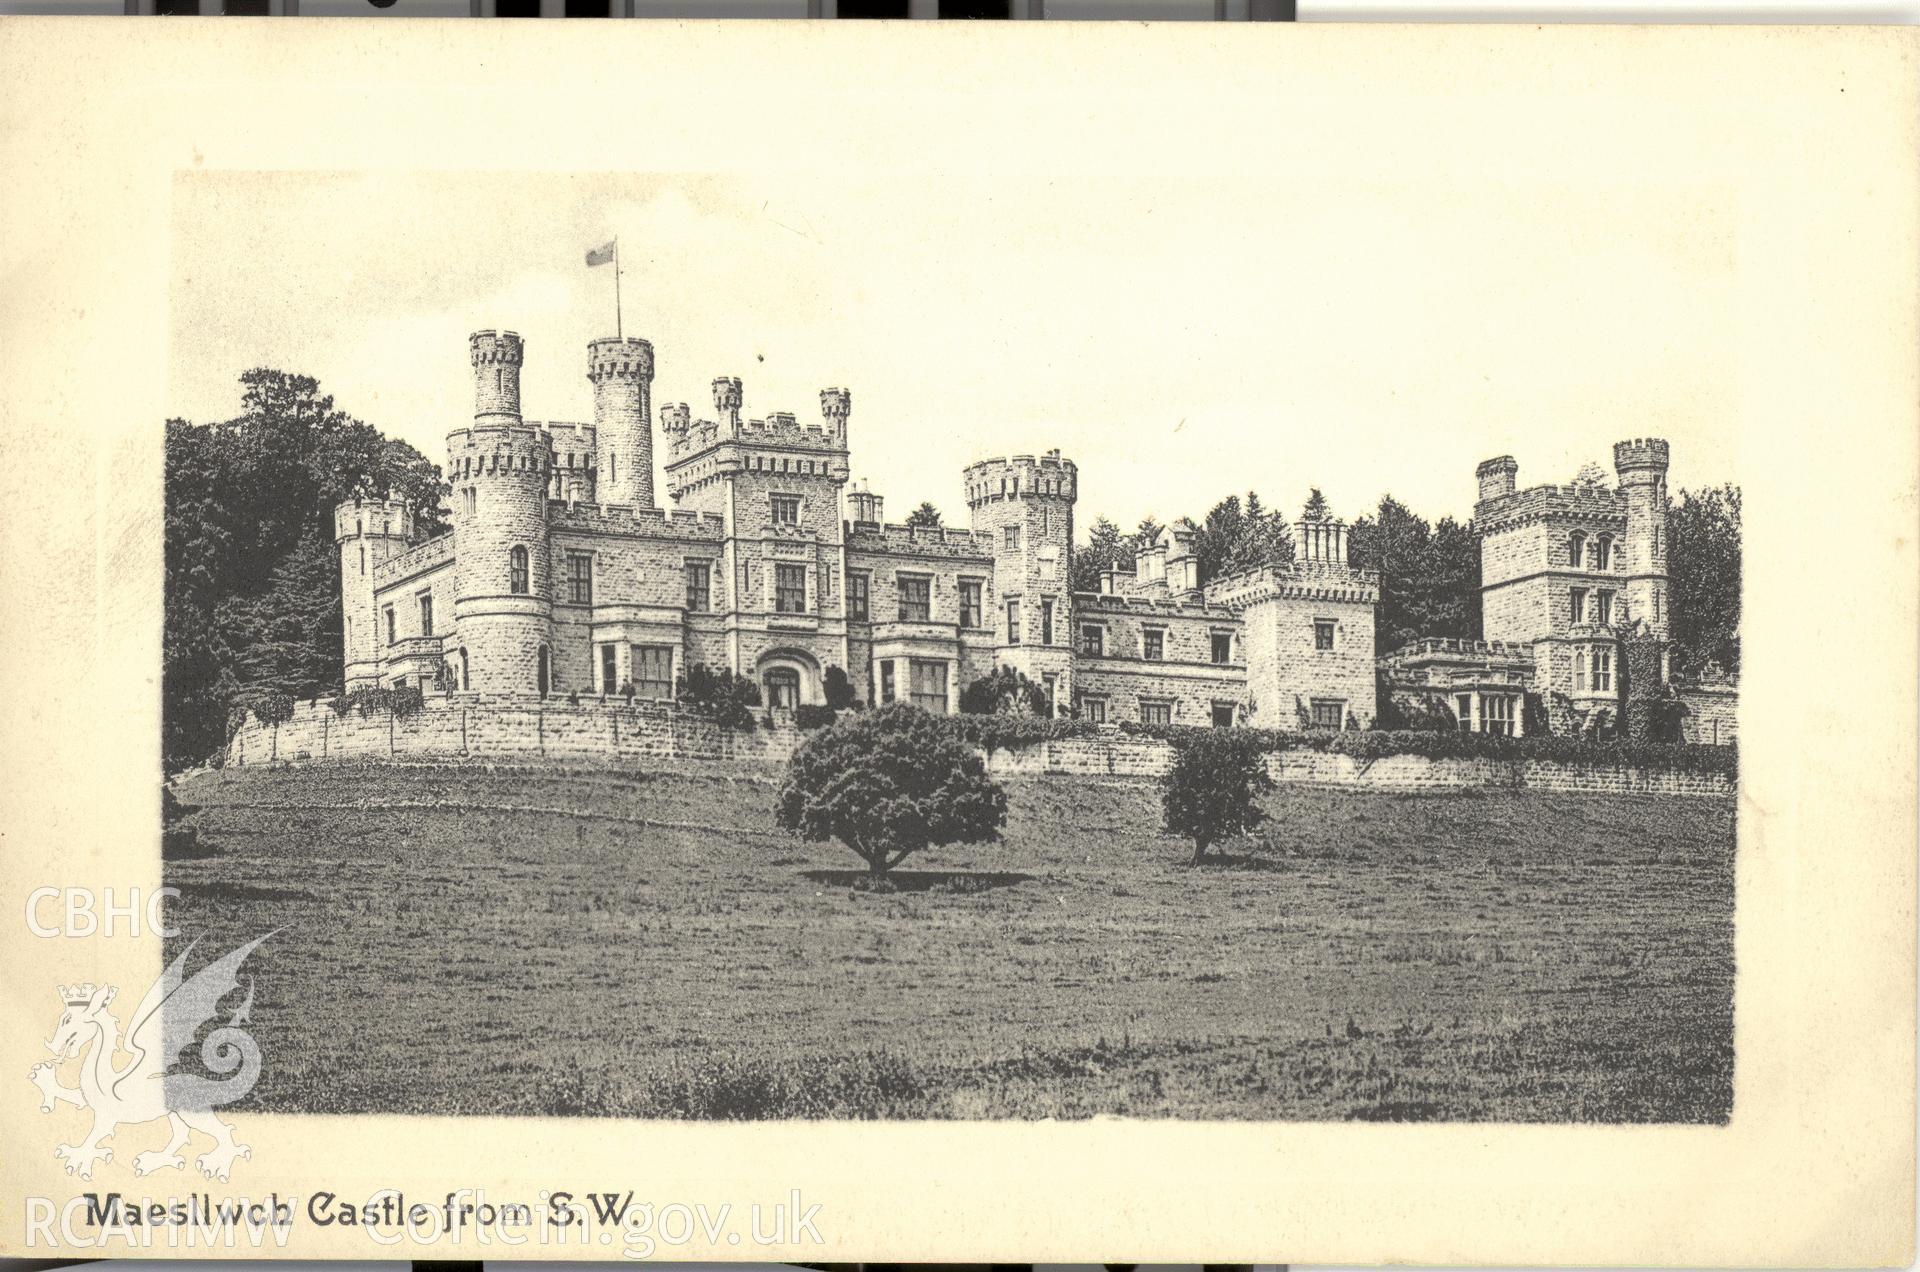 Digitised postcard image of Maesllwch Castle from S.W., Grant, Stationer, Hay. Produced by Parks and Gardens Data Services, from an original item in the Peter Davis Collection at Parks and Gardens UK. We hold only web-resolution images of this collection, suitable for viewing on screen and for research purposes only. We do not hold the original images, or publication quality scans.